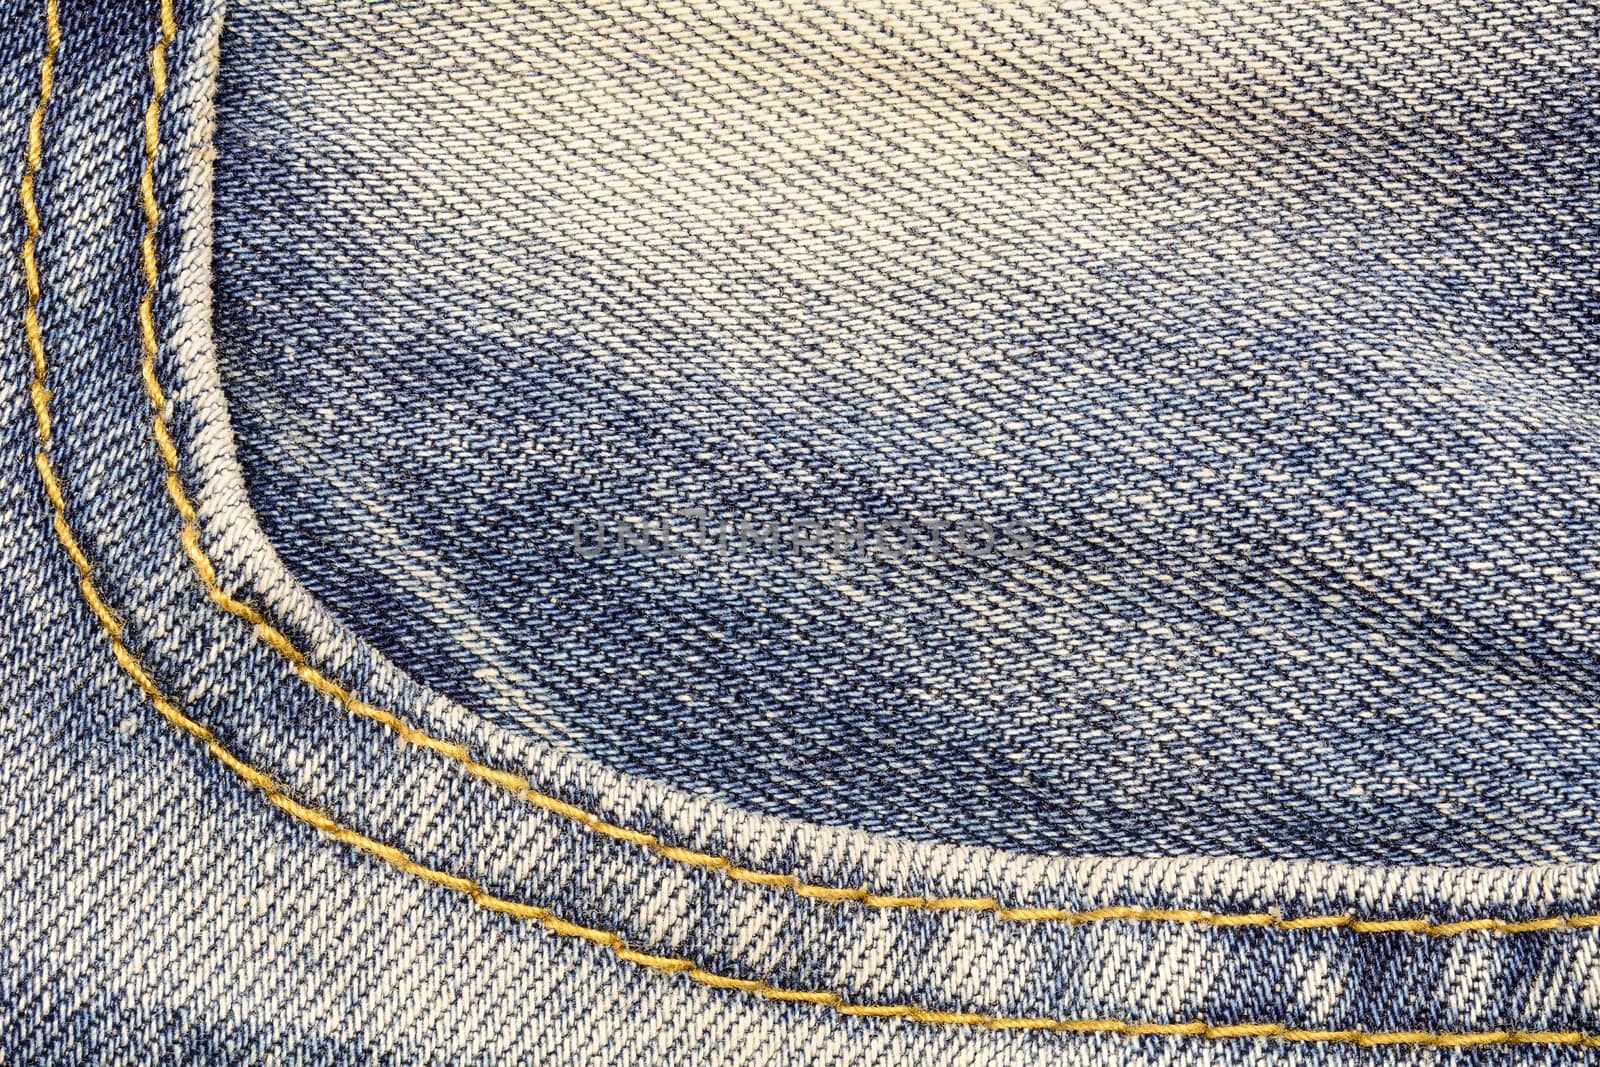 Denim jeans texture with curve seams by ipuwadol